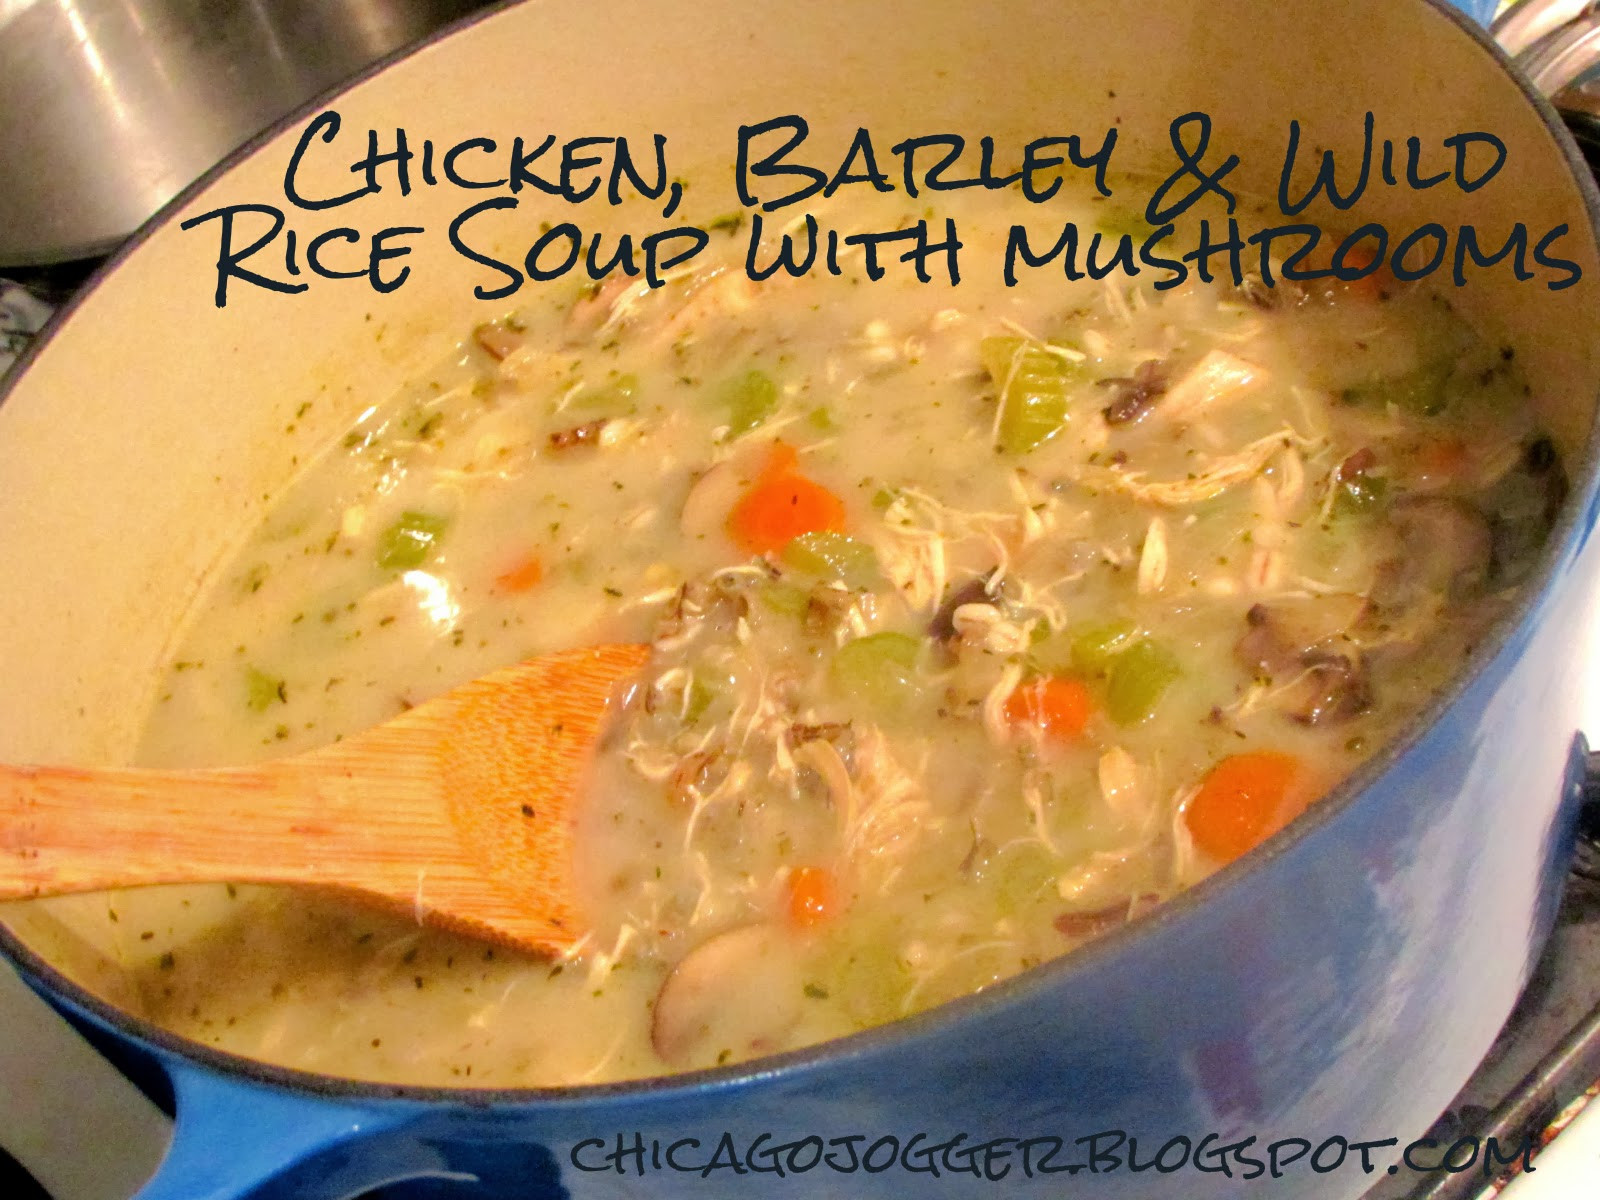 Chicken Mushroom And Wild Rice Soup
 Chicago Jogger Chicken Barley & Wild Rice Soup with